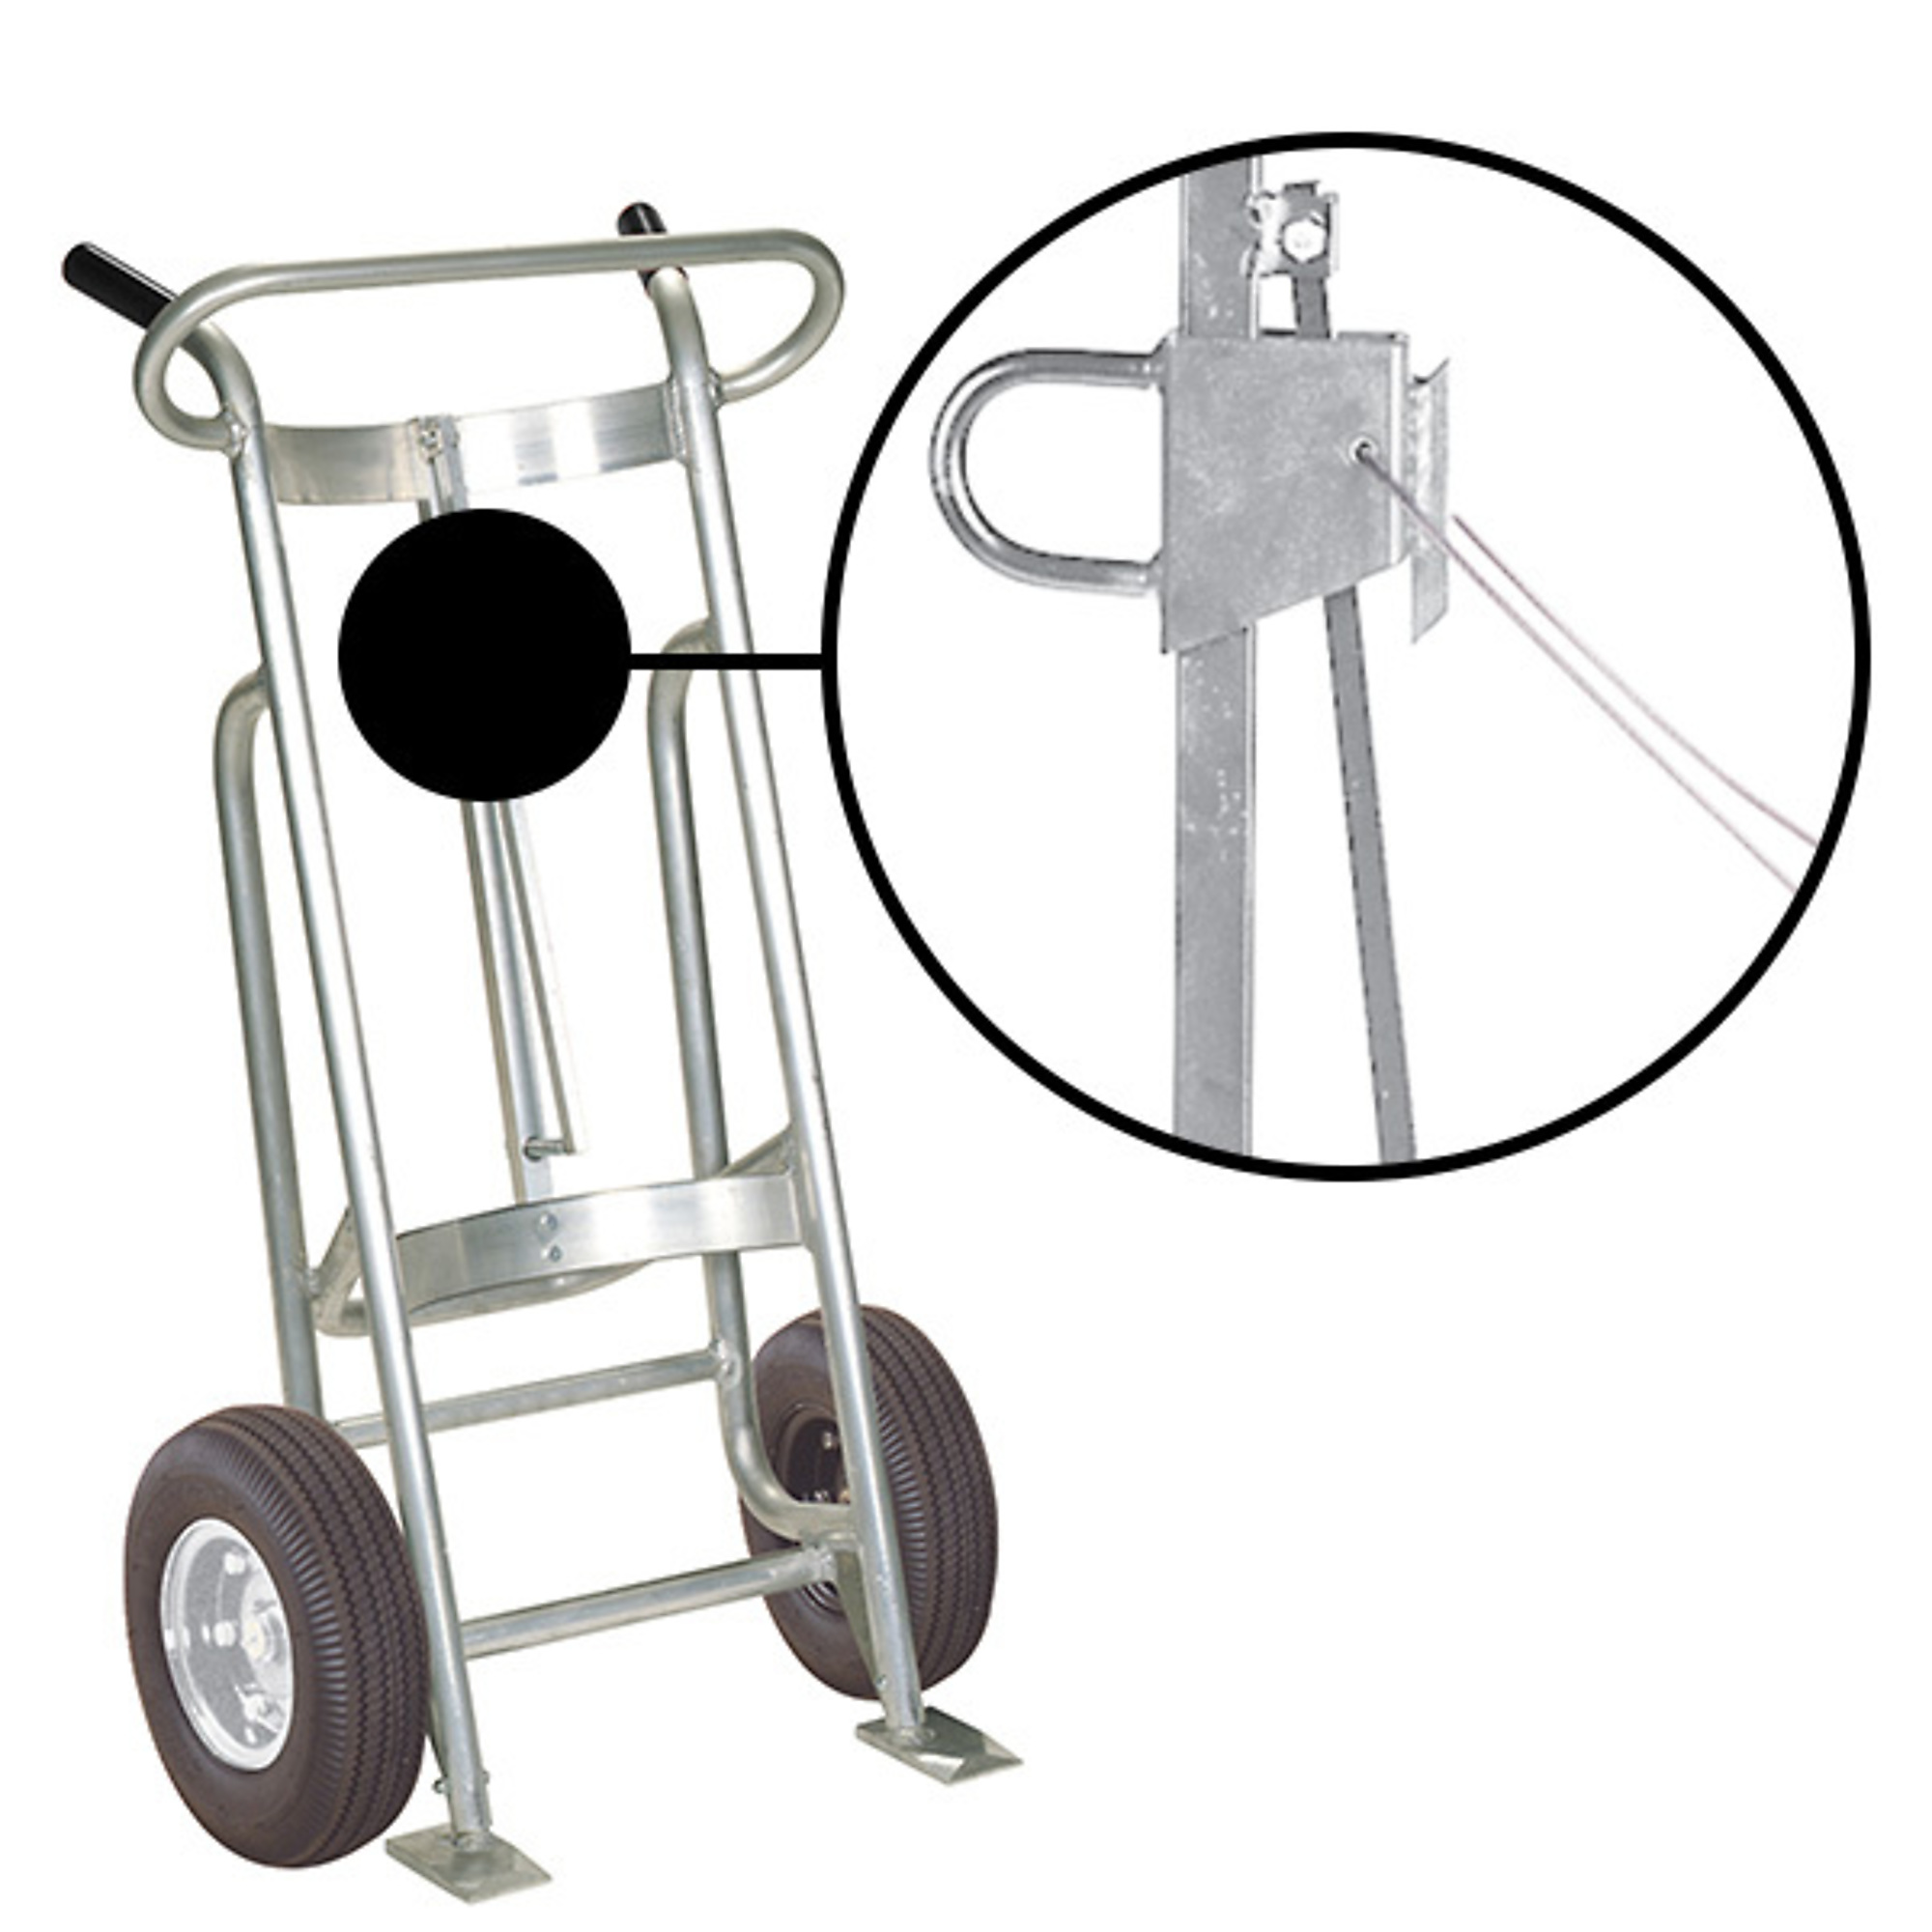 Valley Craft, 2-Wheel Drum Hand Truck, Load Capacity 1000 lb, Height 52 in, Material Aluminum, Model F81500A0C